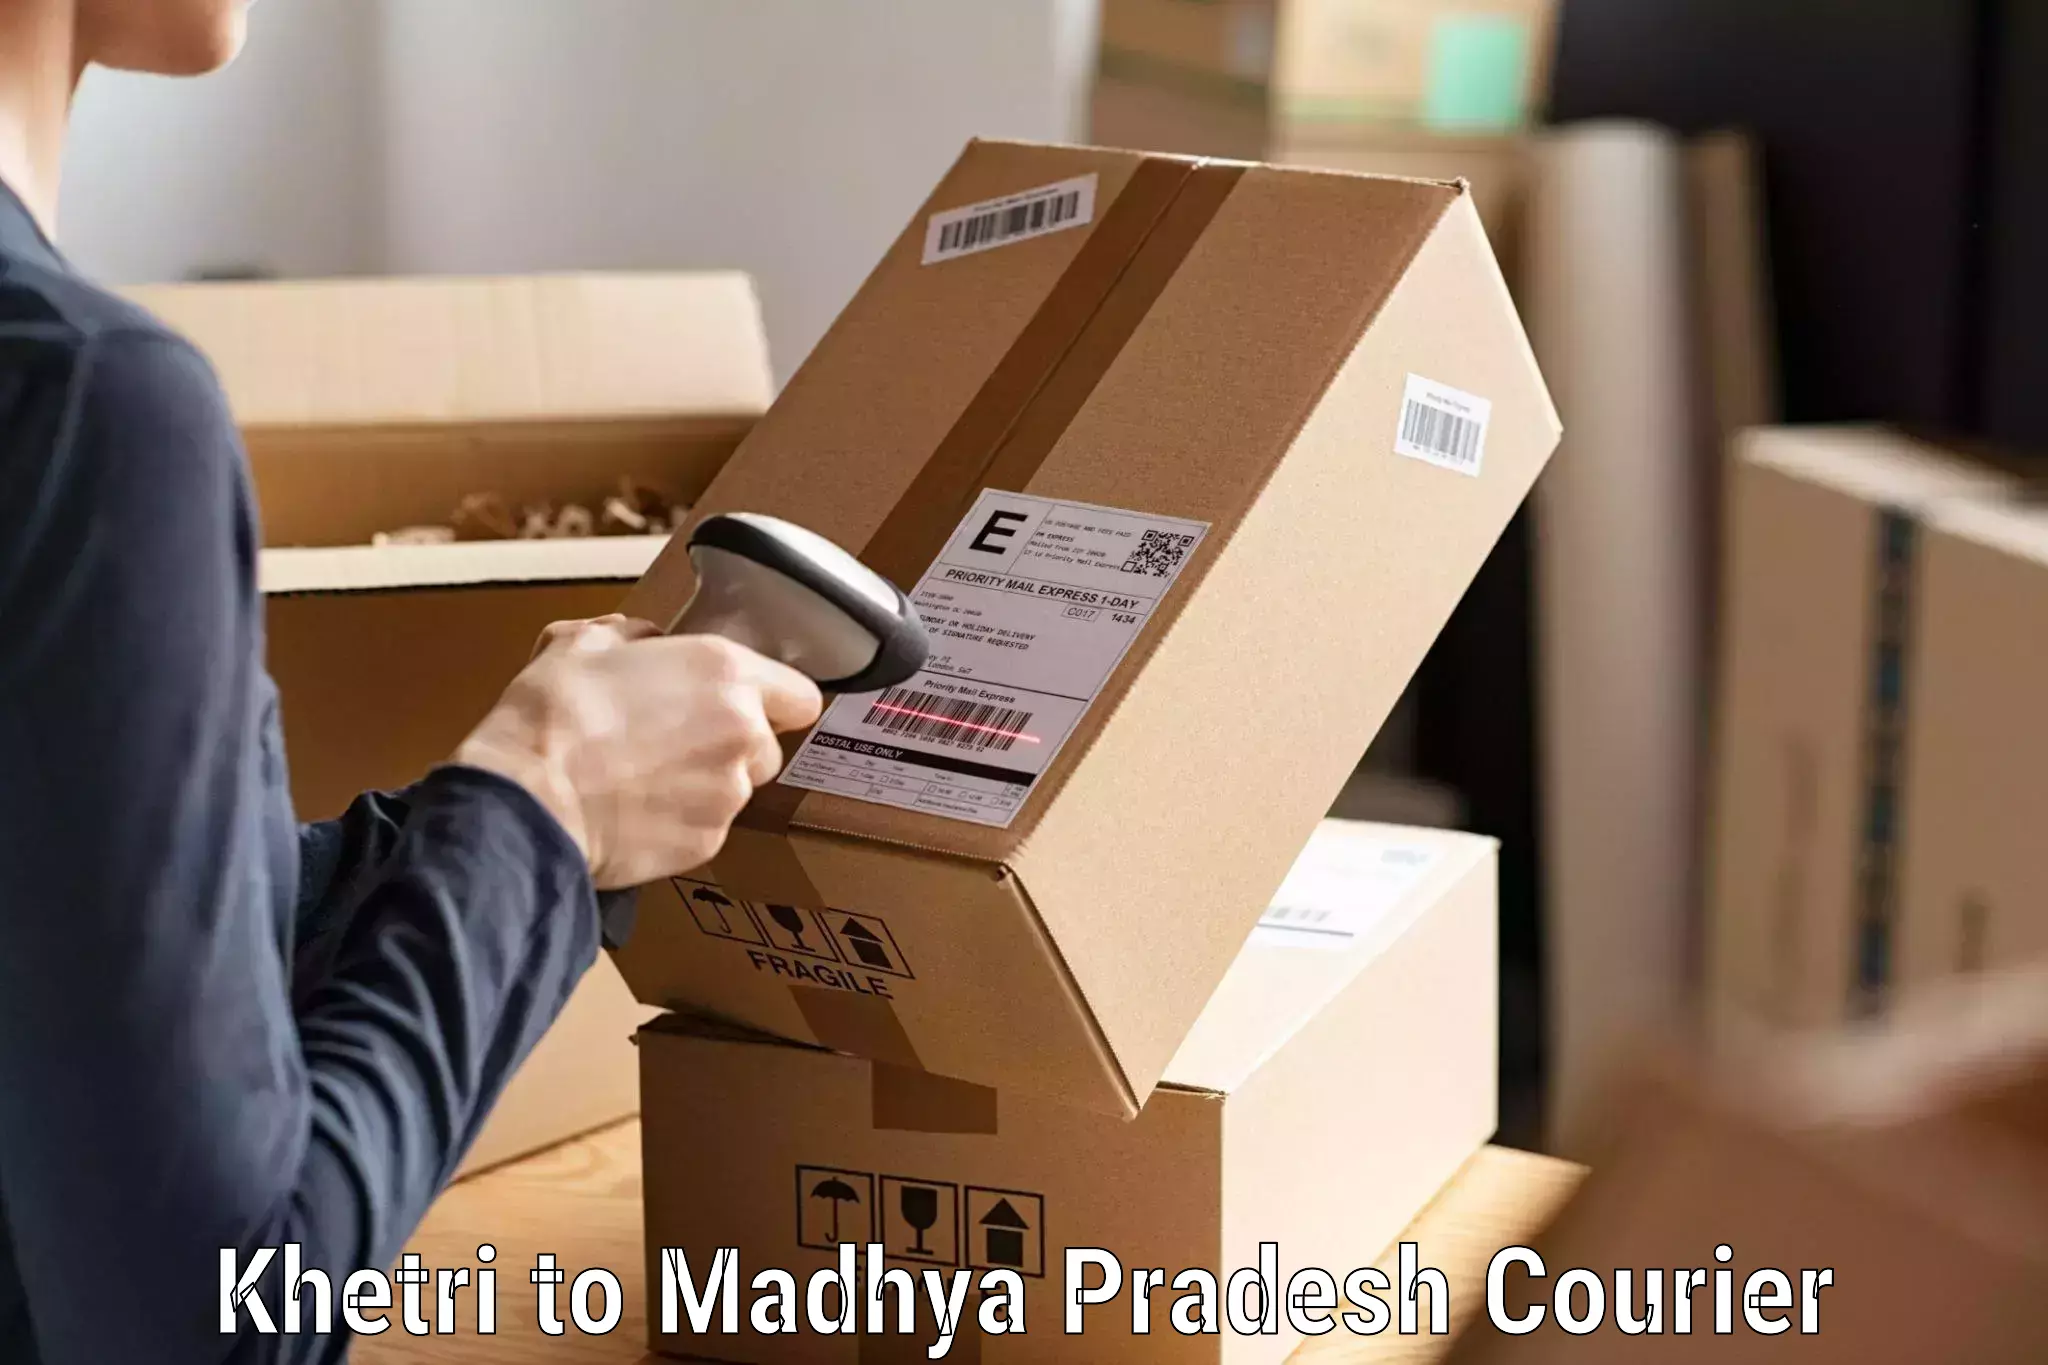 State-of-the-art courier technology Khetri to Chitrangi